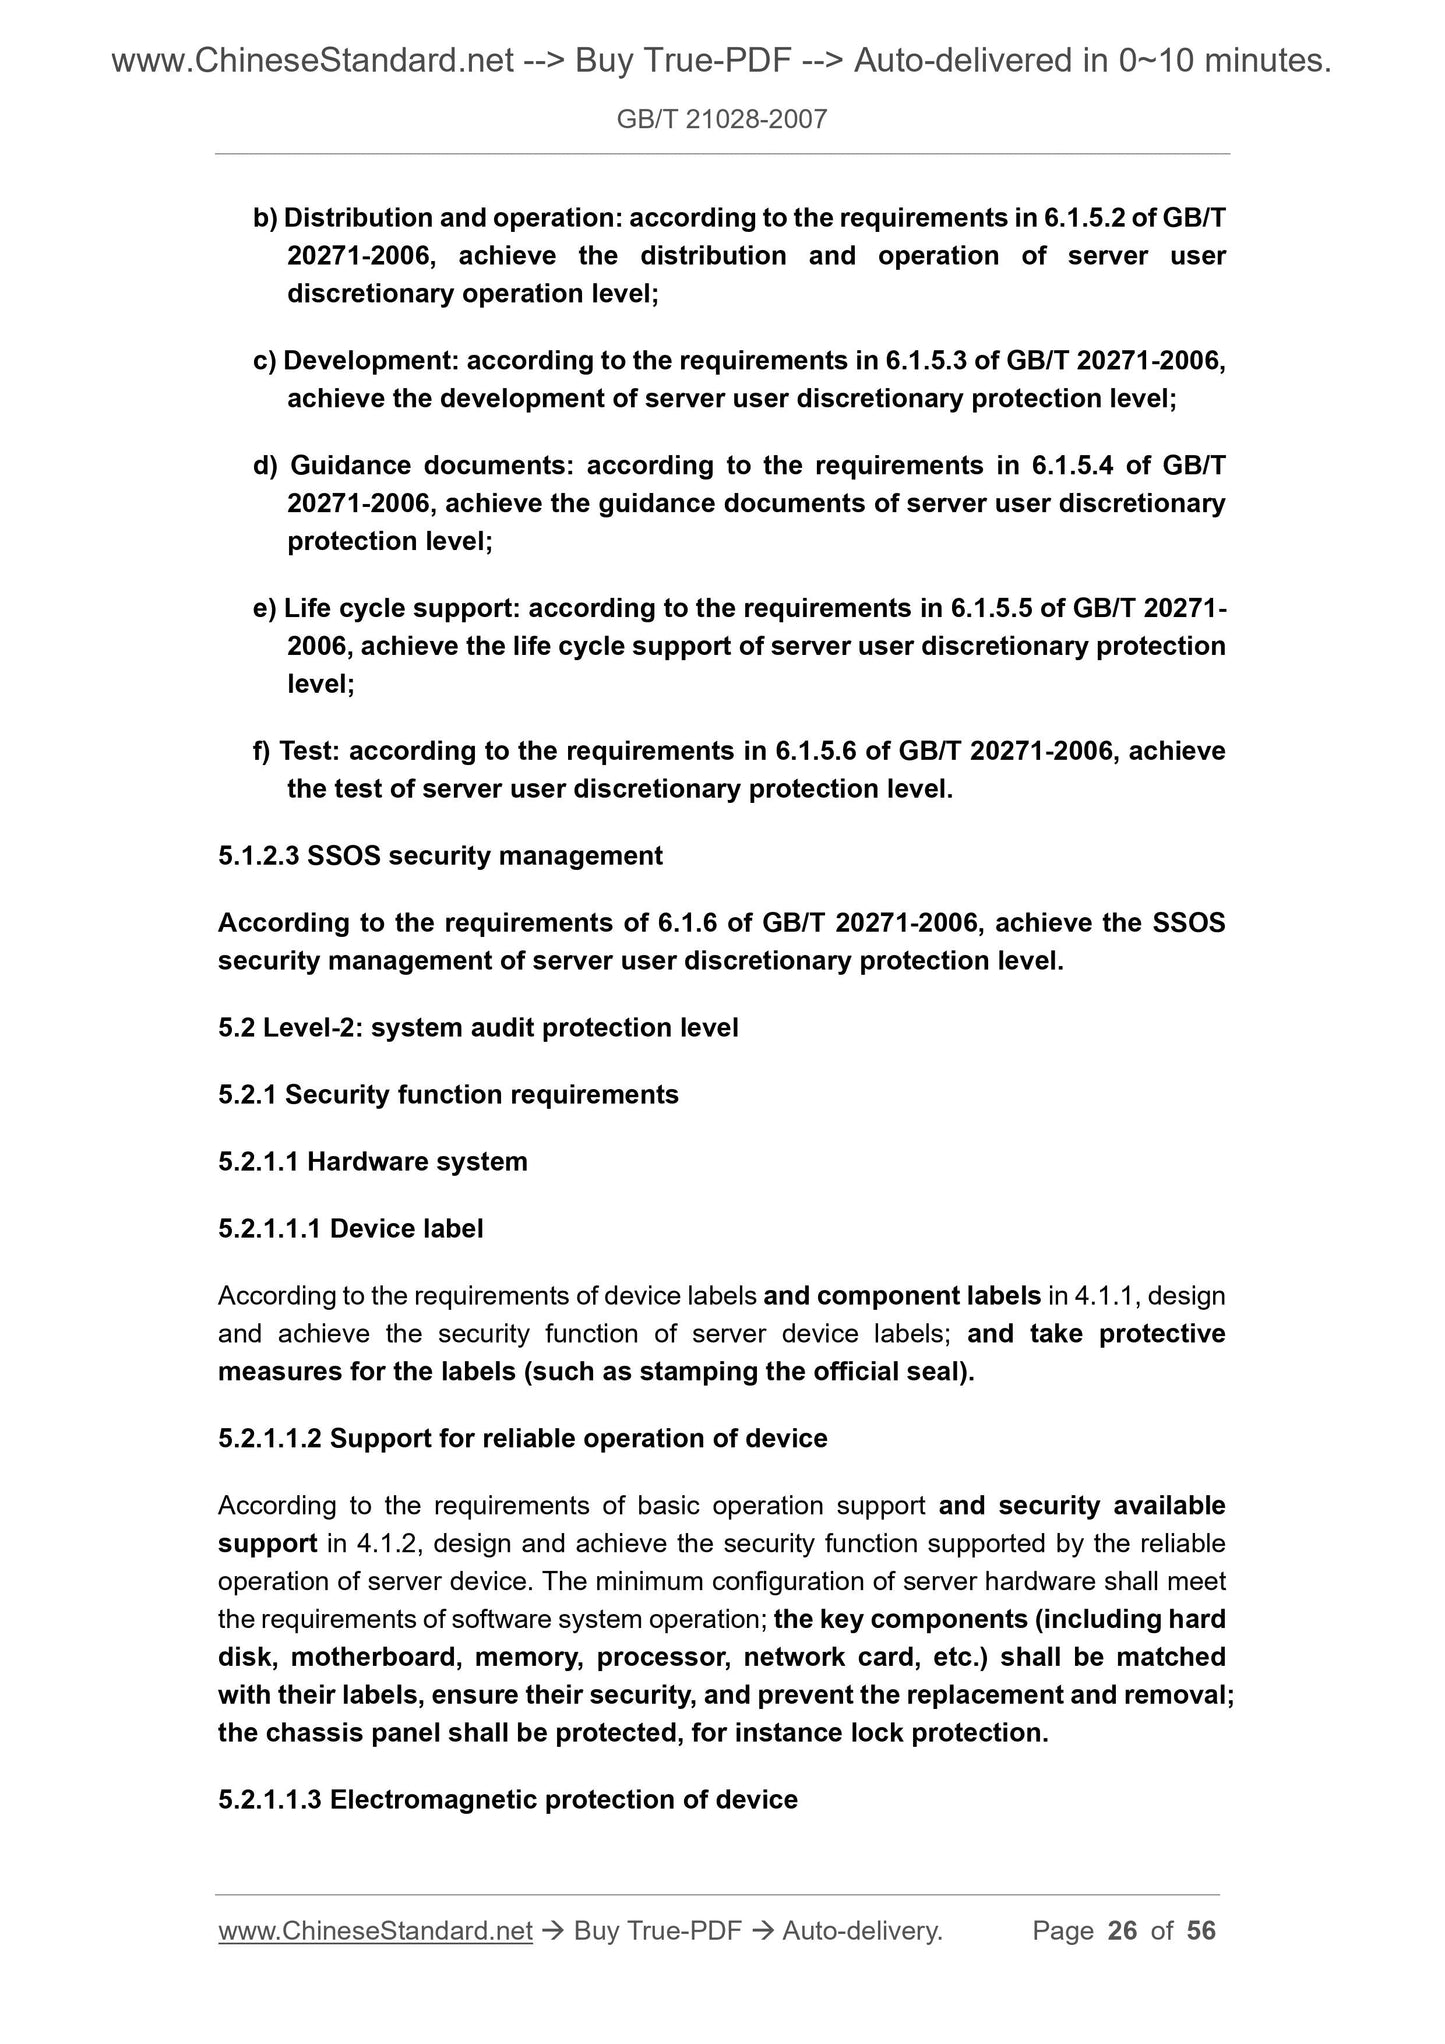 GB/T 21028-2007 Page 11